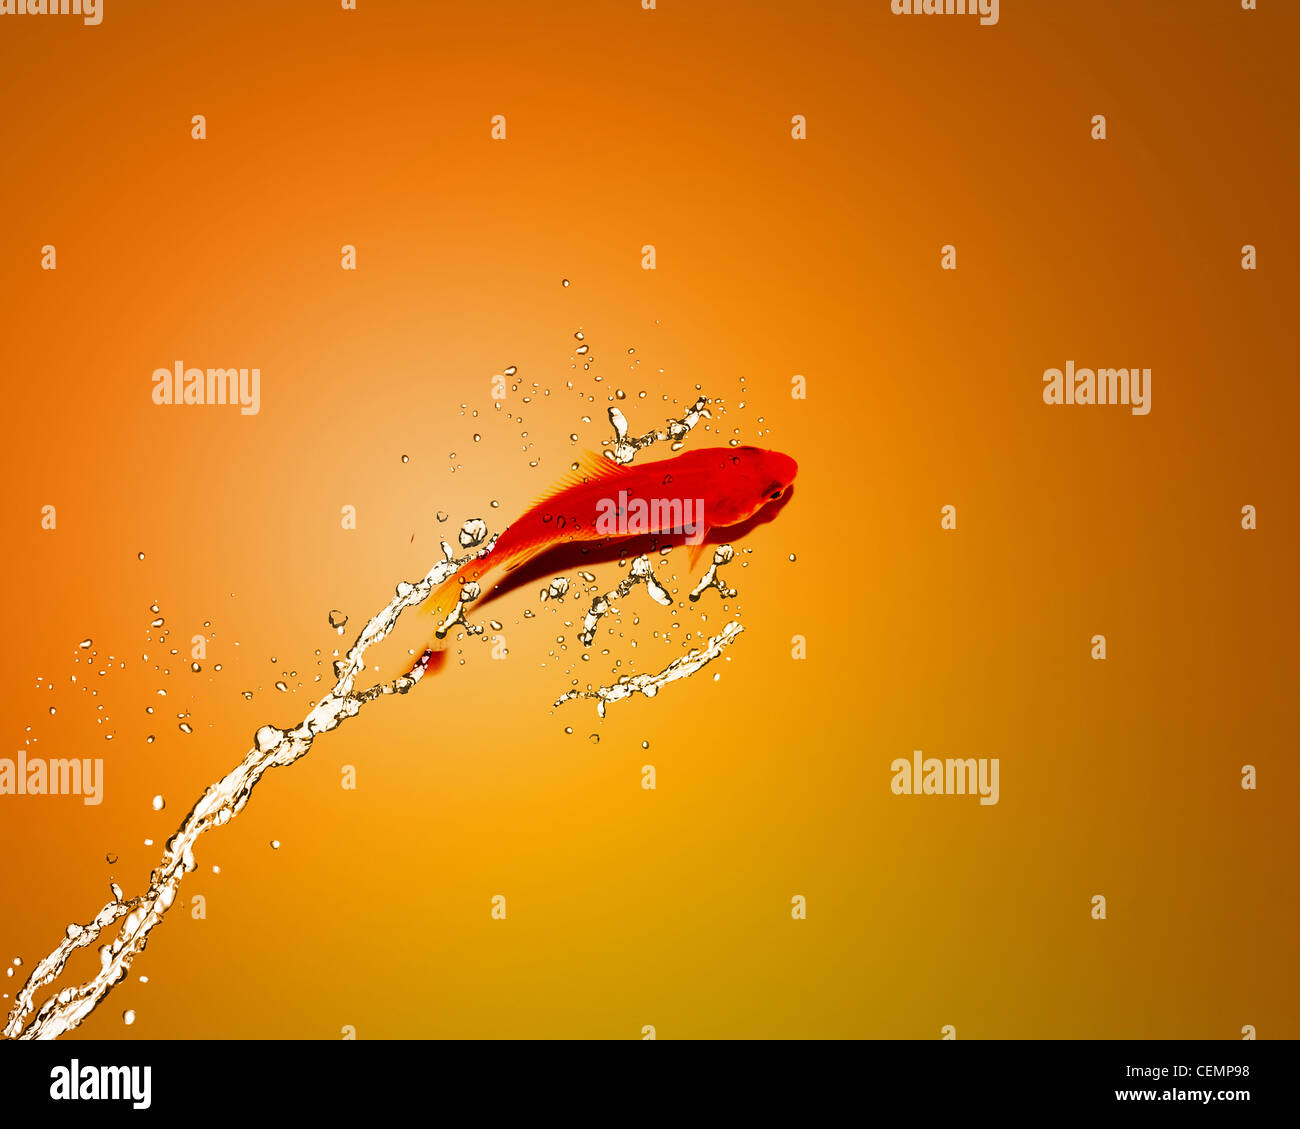 Golden fish jumping out of water, Good Concept for bad luck, unlucky, risks concept. Stock Photo